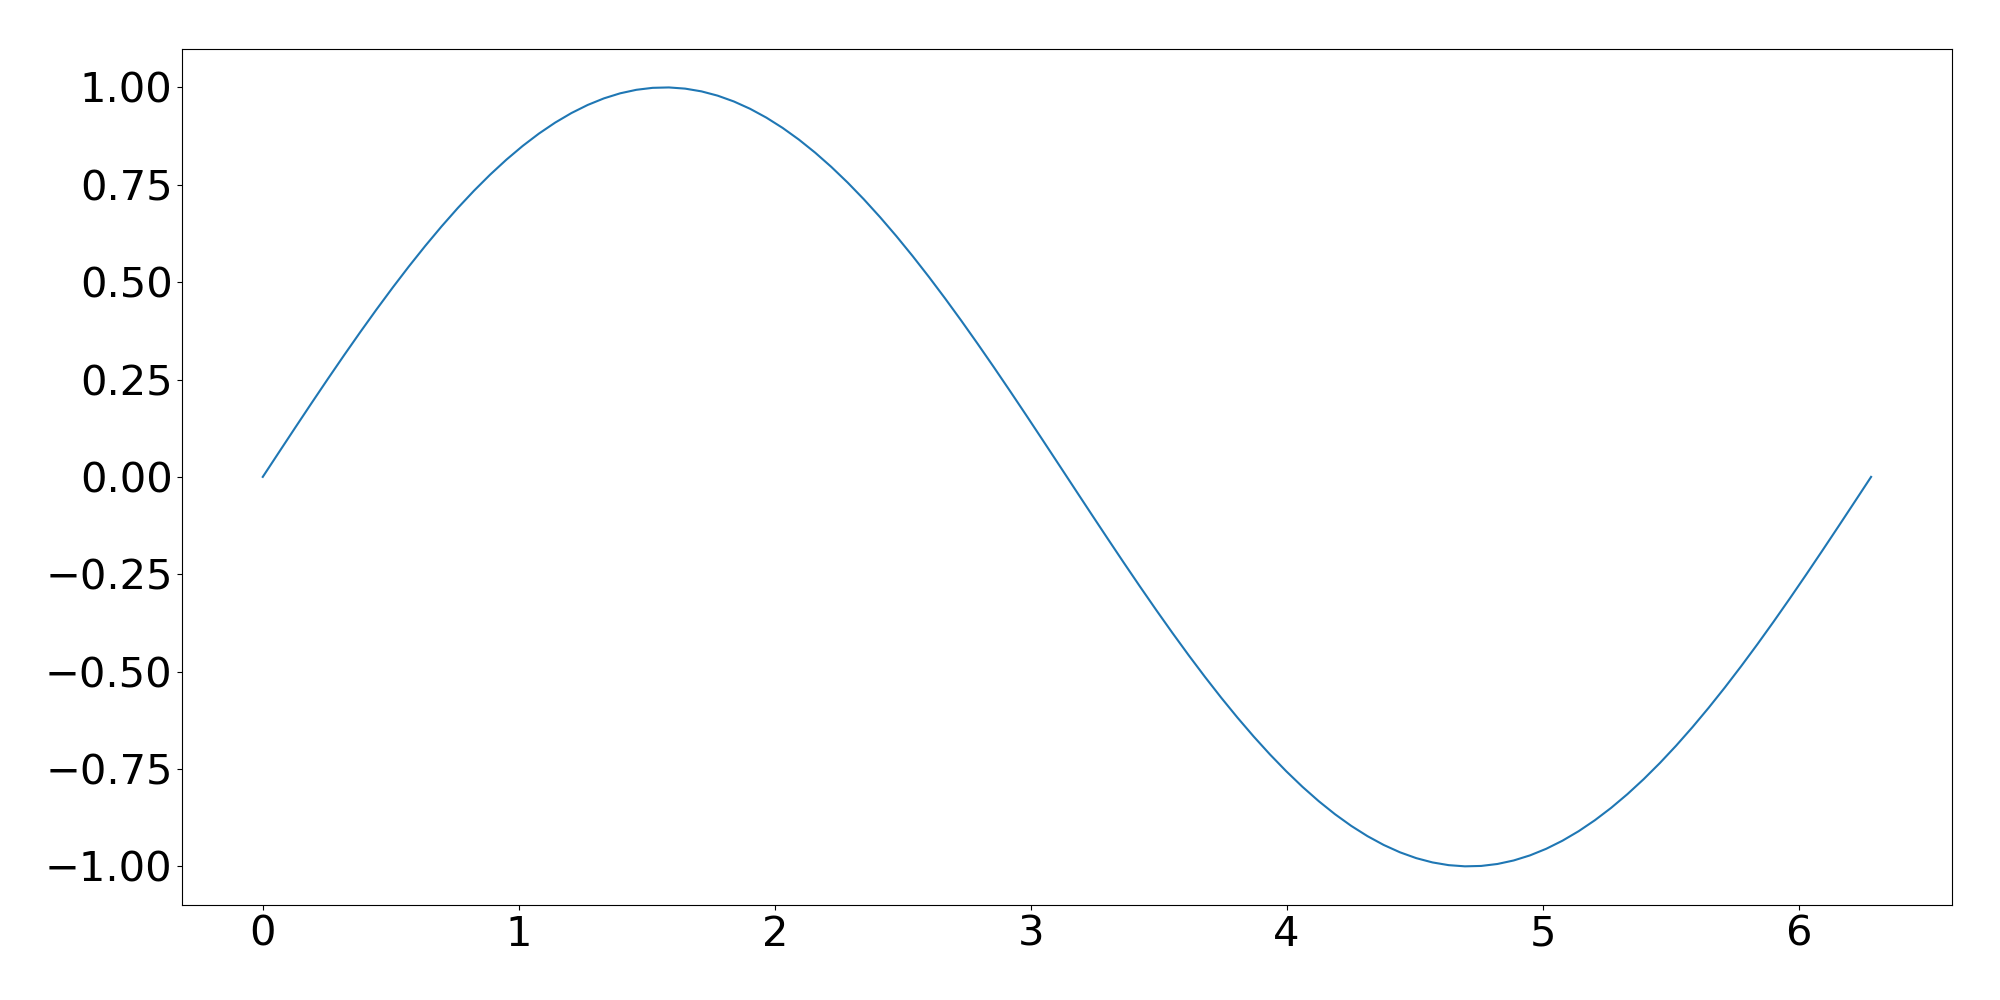 A plot of y=sin(x) for x between 0 and 2*pi.